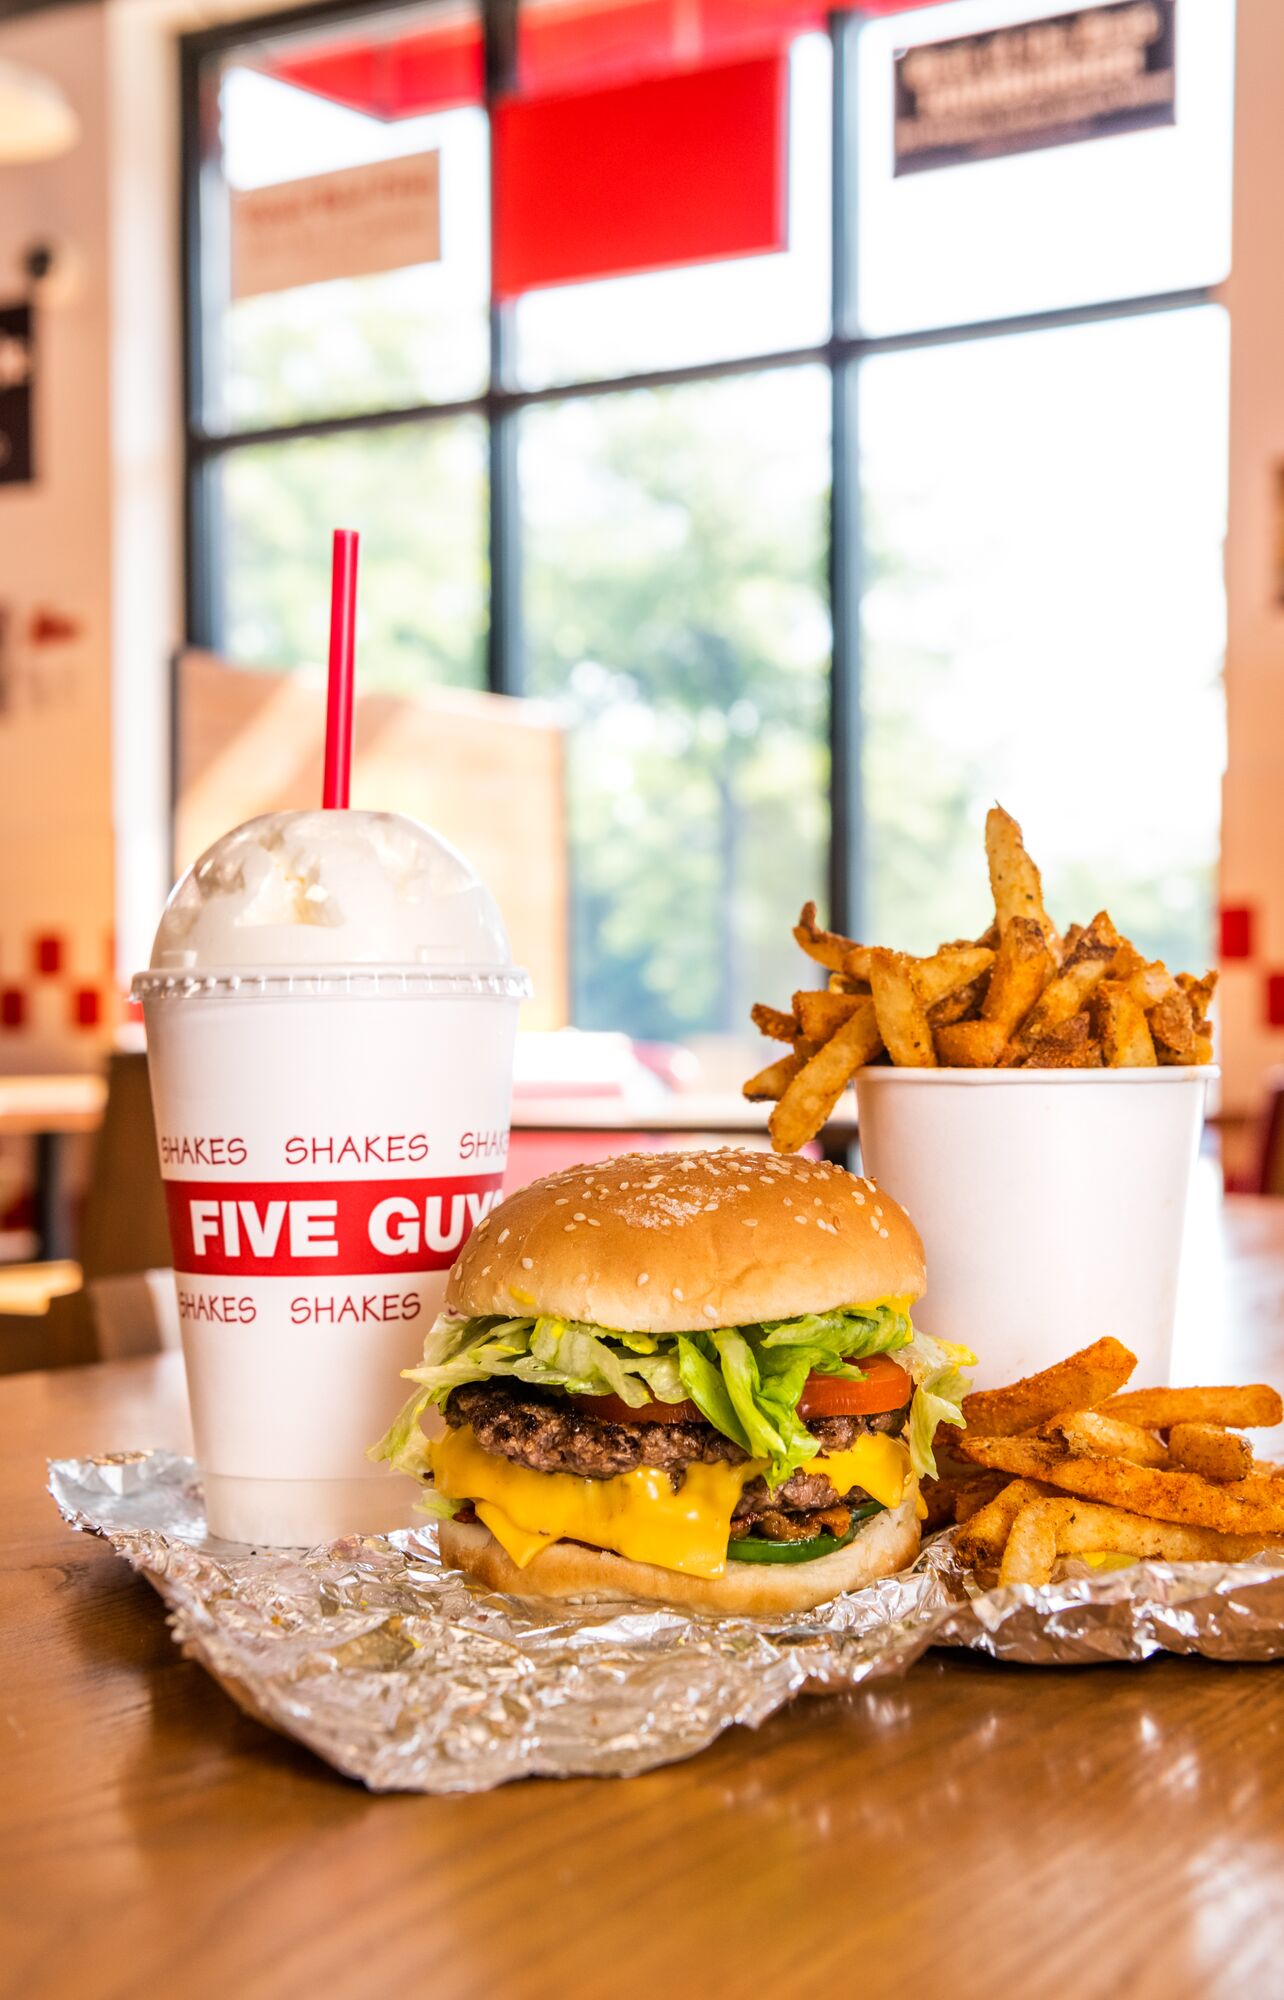 A Five Guys cheeseburger, milkshake and regular order of fries sits on a table inside a Five Guys re Five Guys Thousand Oaks (805)496-0173